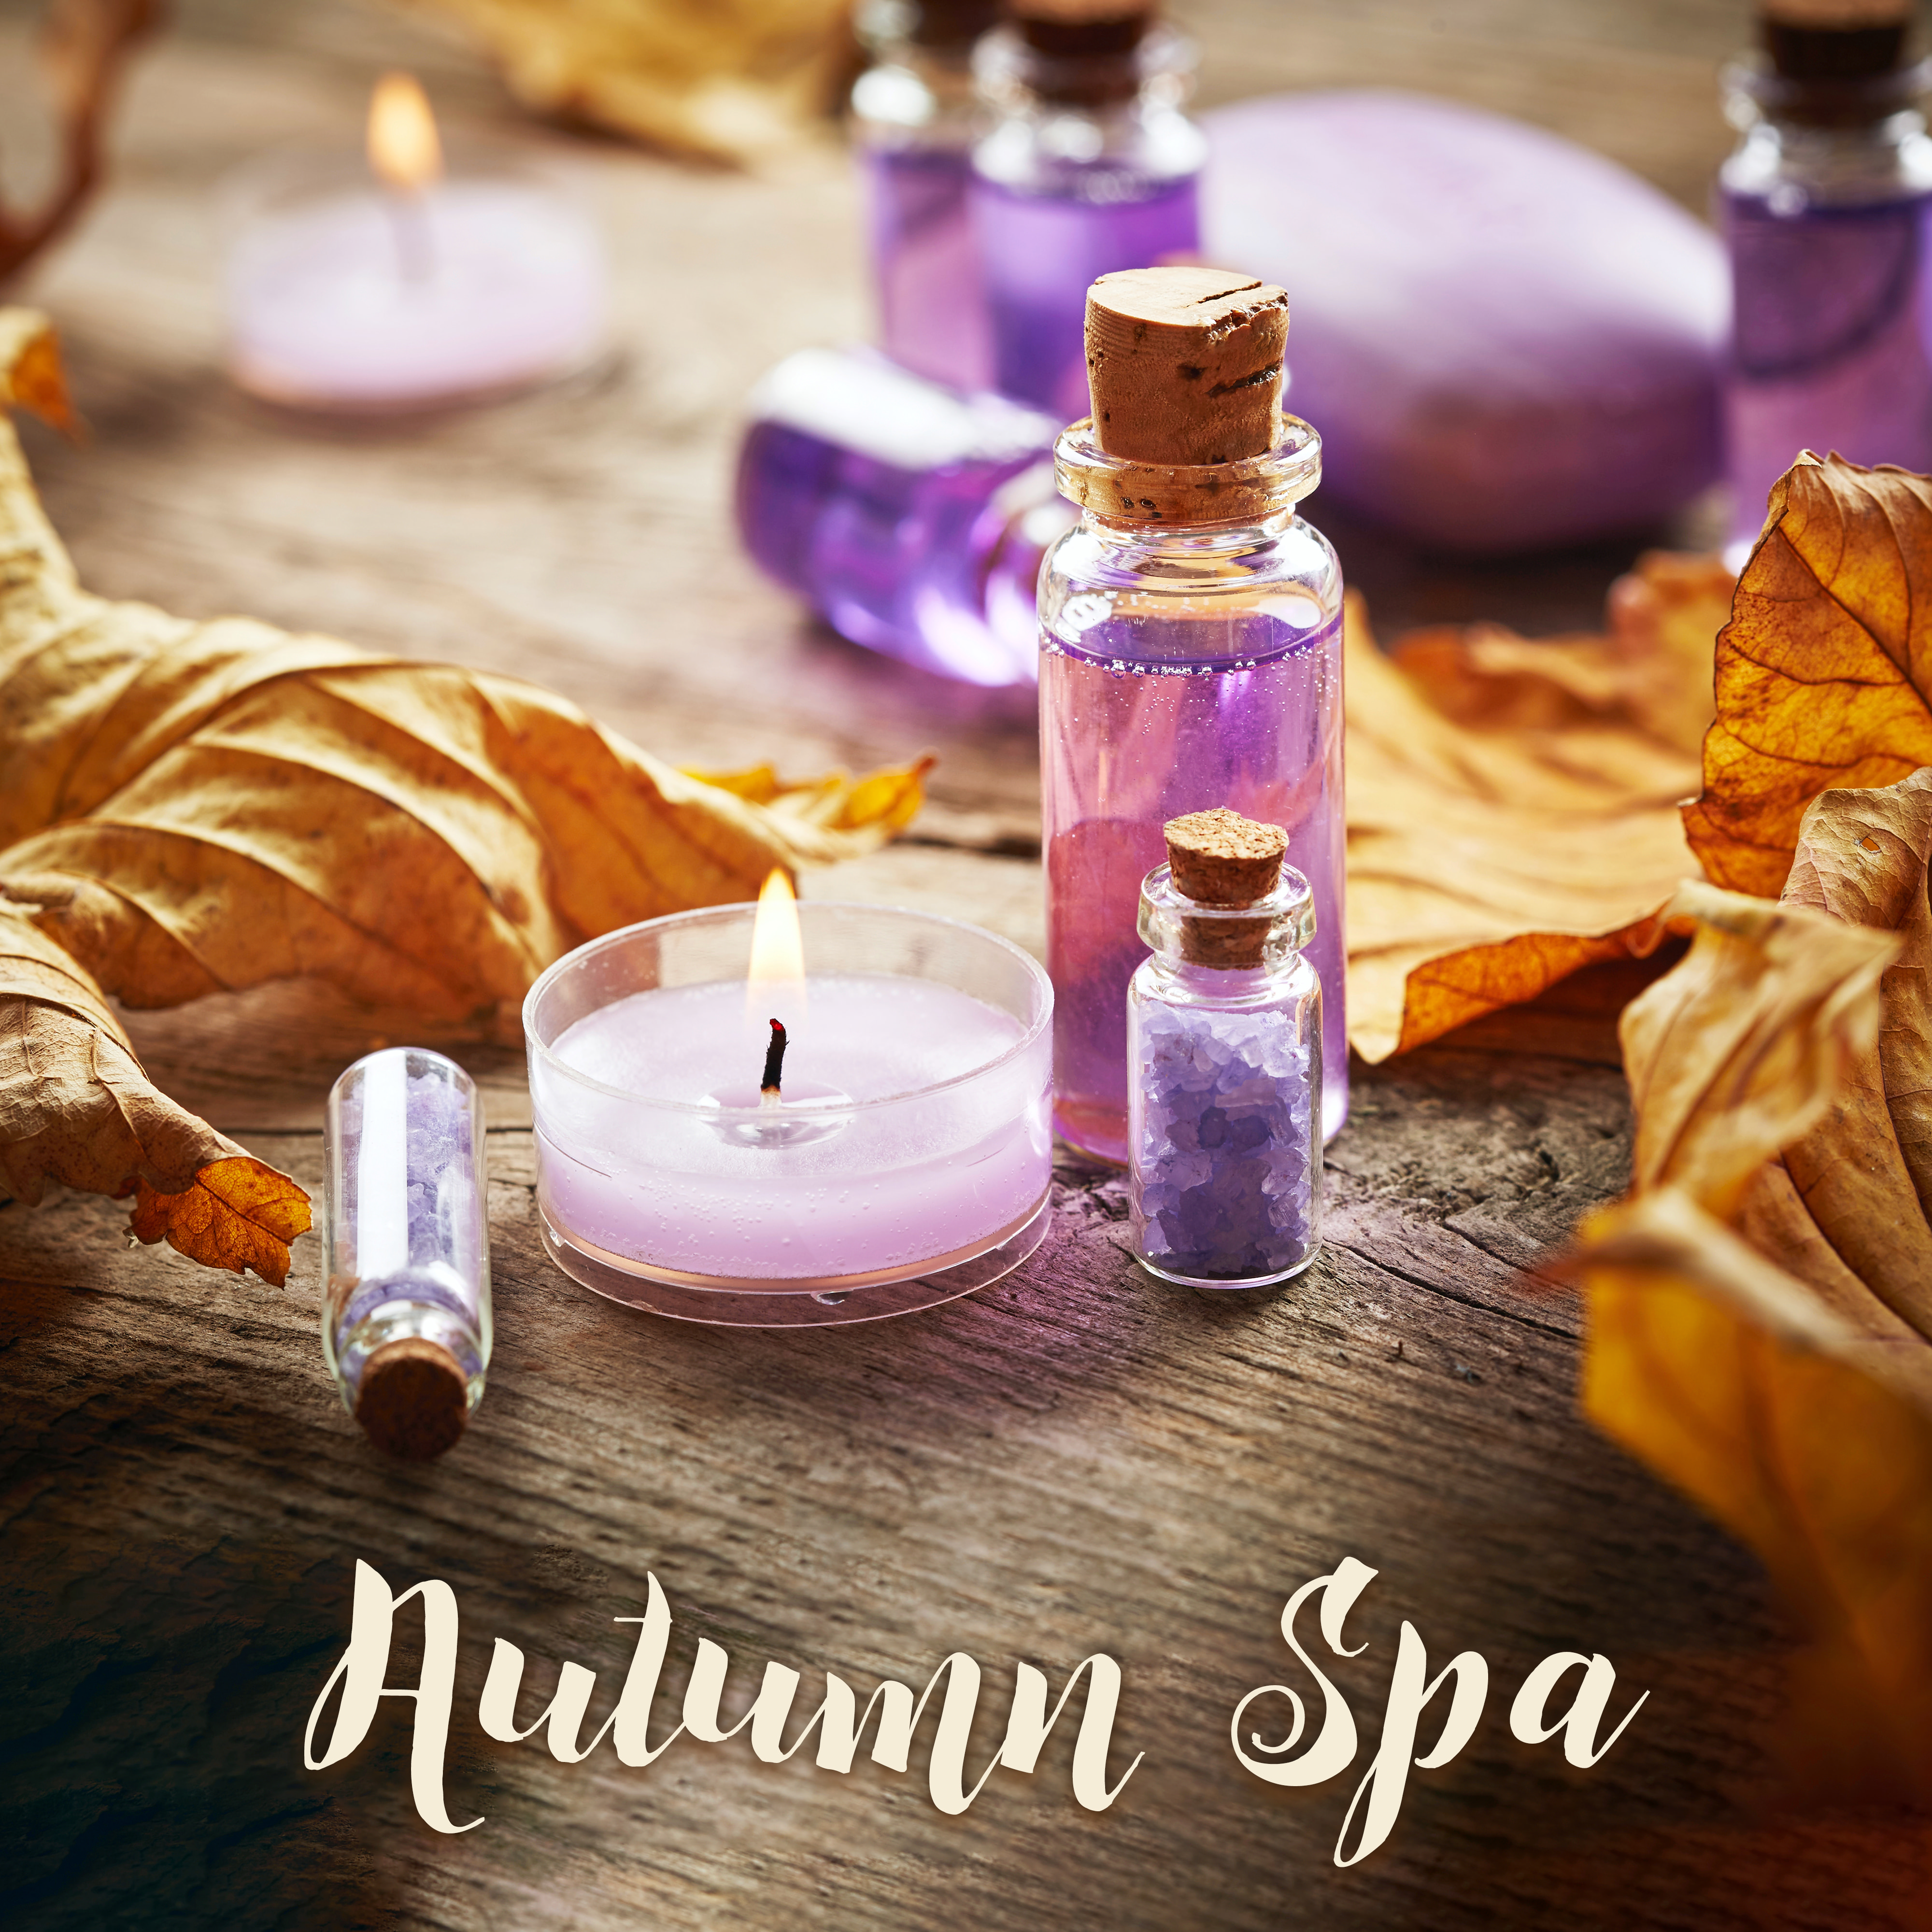 Autumn Spa  Peaceful New Age, Relaxing Music for Massage, Sensual Touch, Spa Music, Day for Your Beauty, Moments of Relaxation